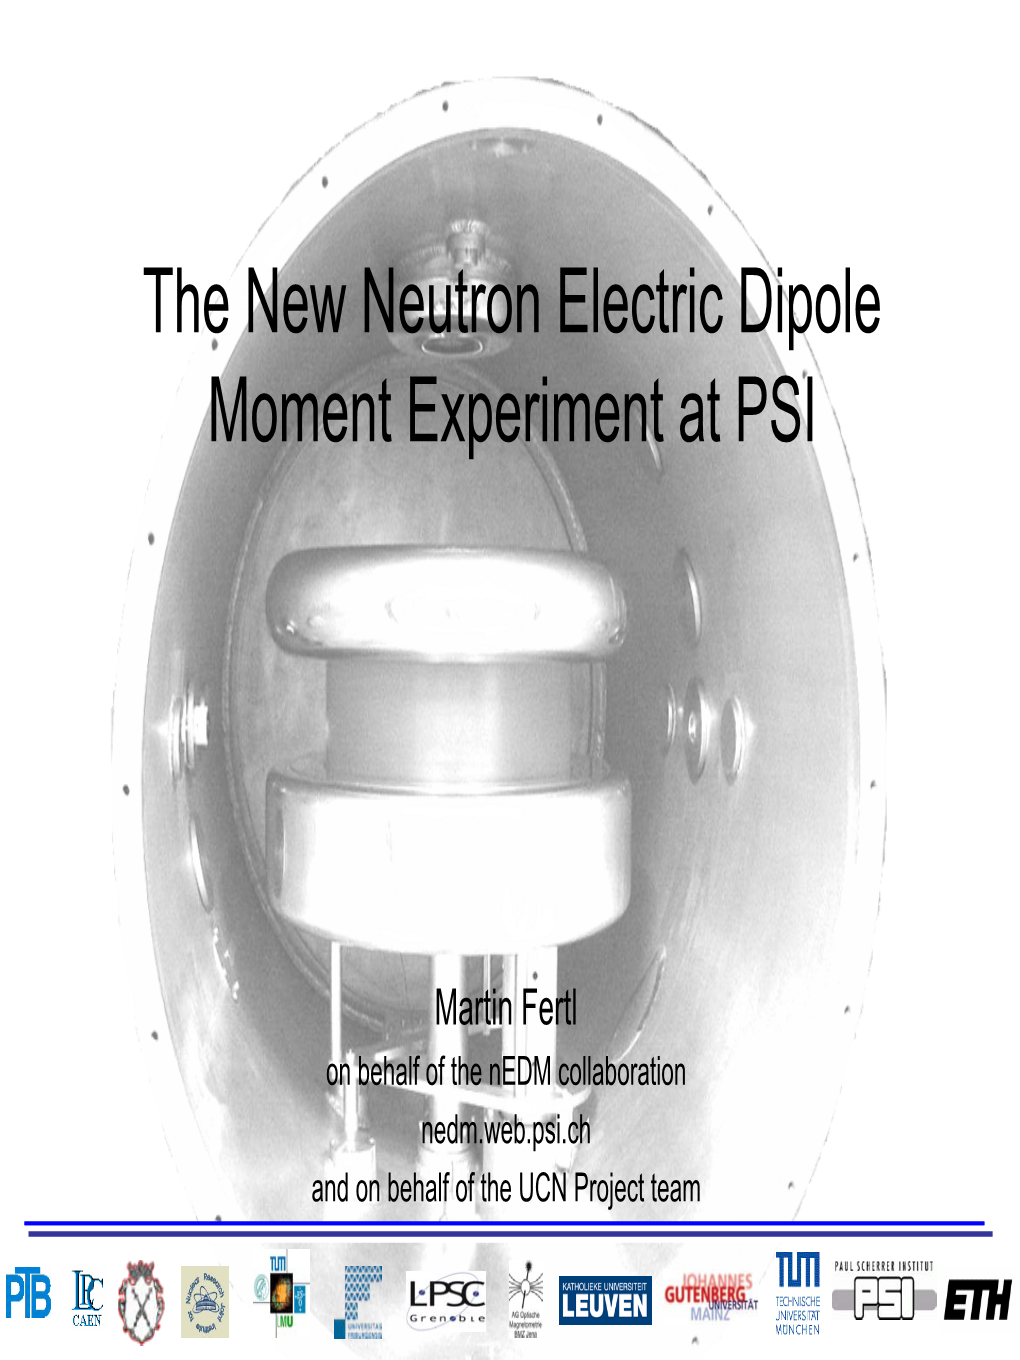 The New Neutron Electric Dipole Moment Experiment at PSI